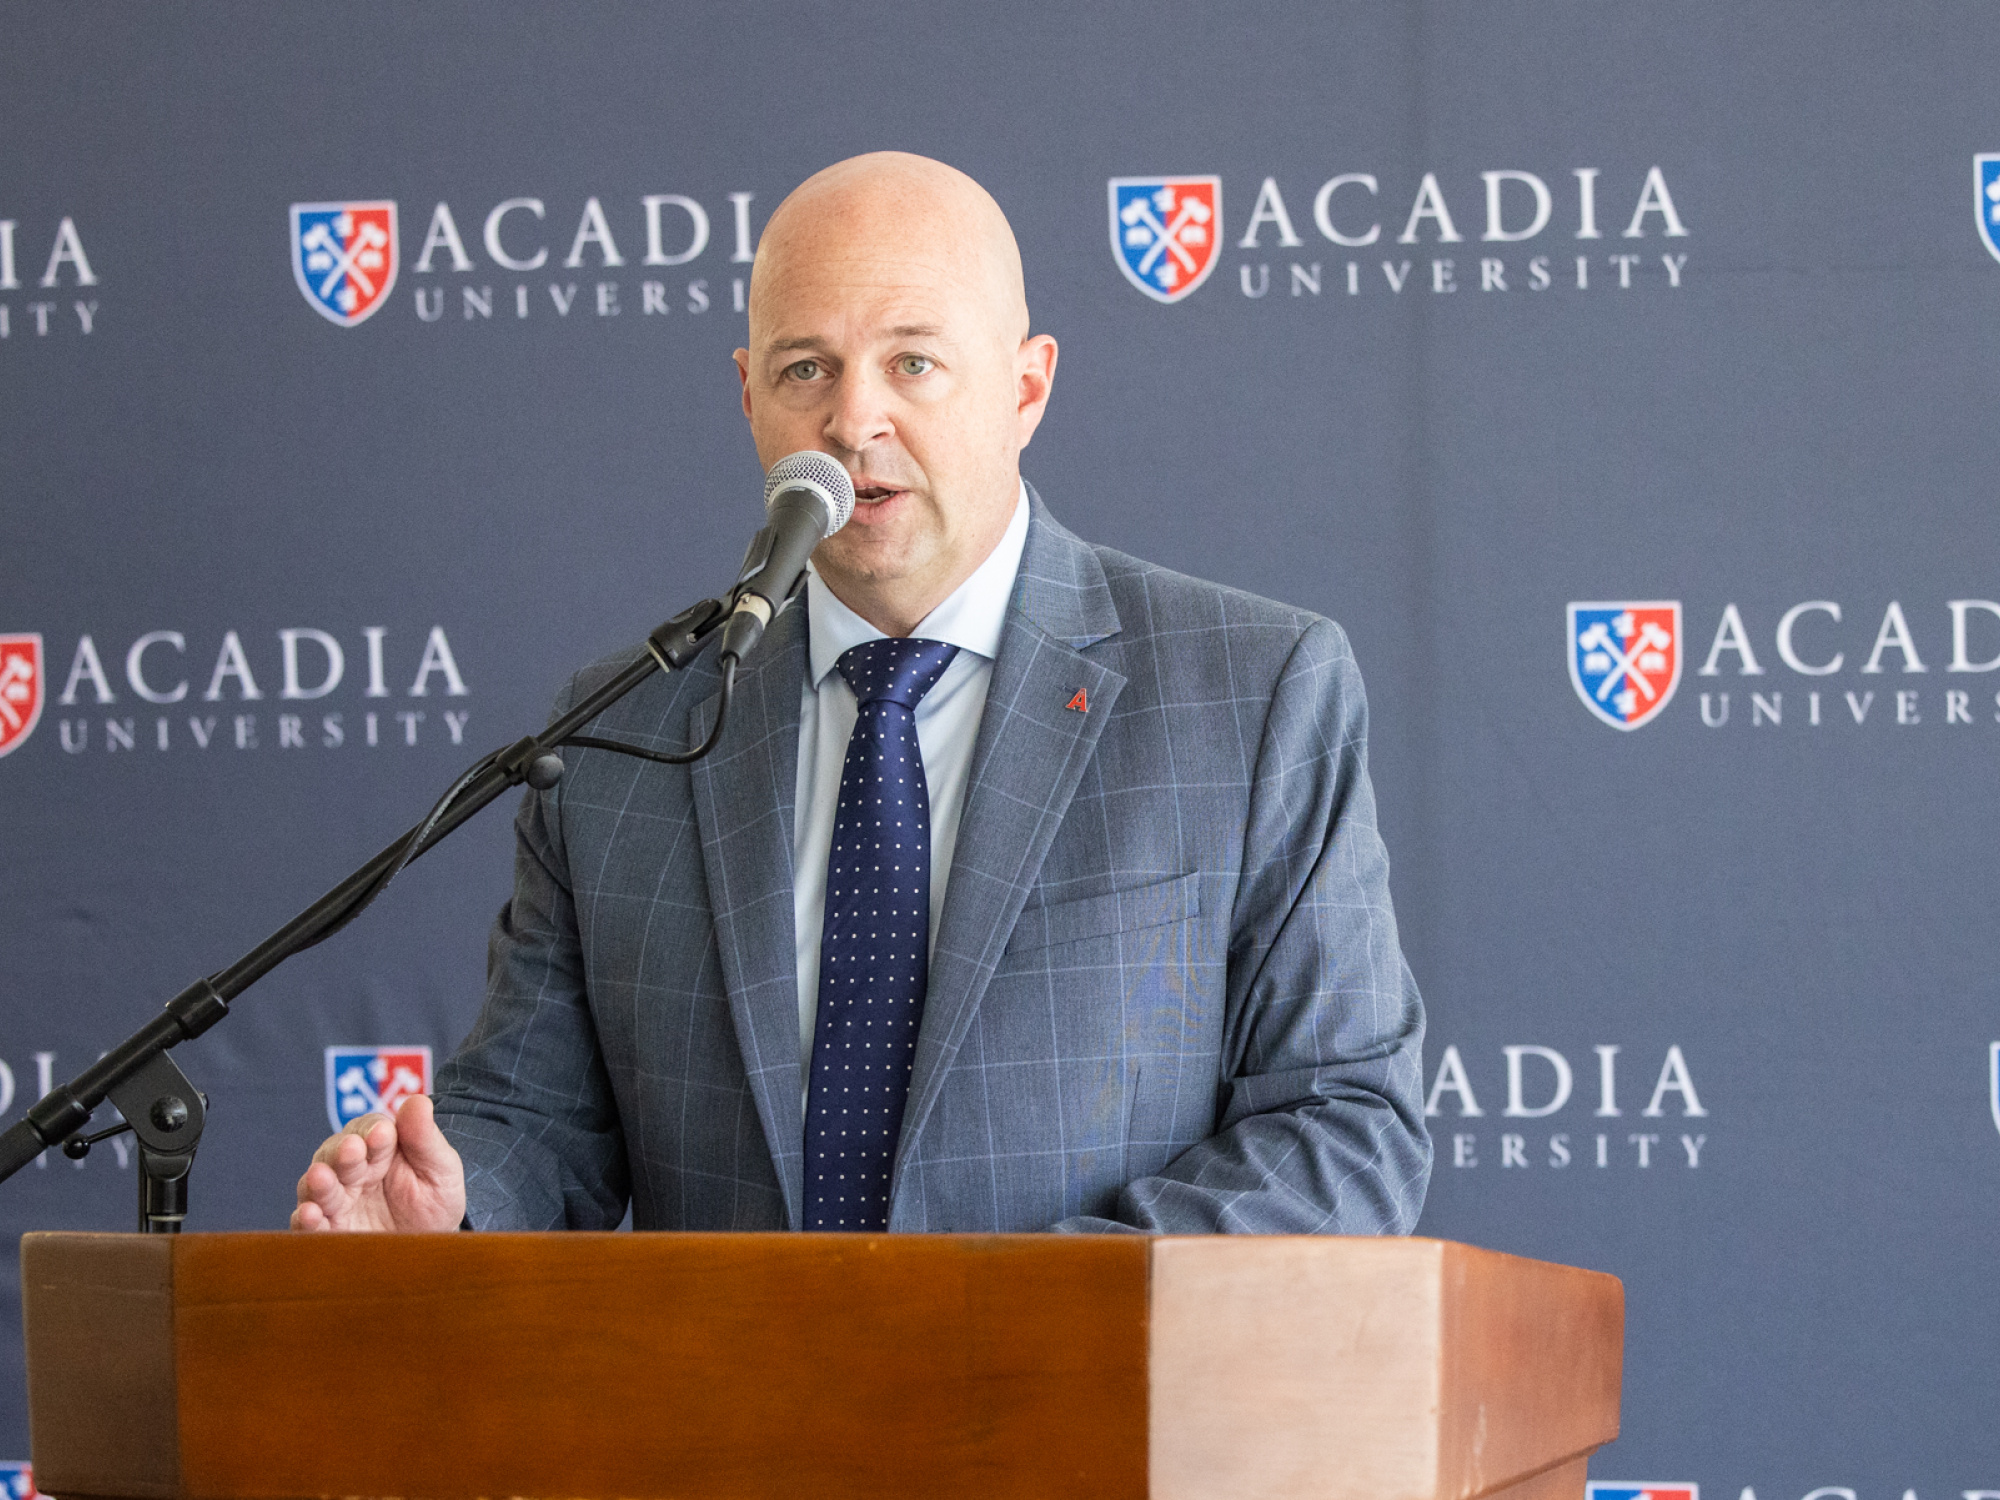 Jeff Hennessy, President and Vice-Chancellor, says the Province’s support for a new training facility at Acadia University is a “significant milestone” for nursing and the university. (Communications Nova Scotia)